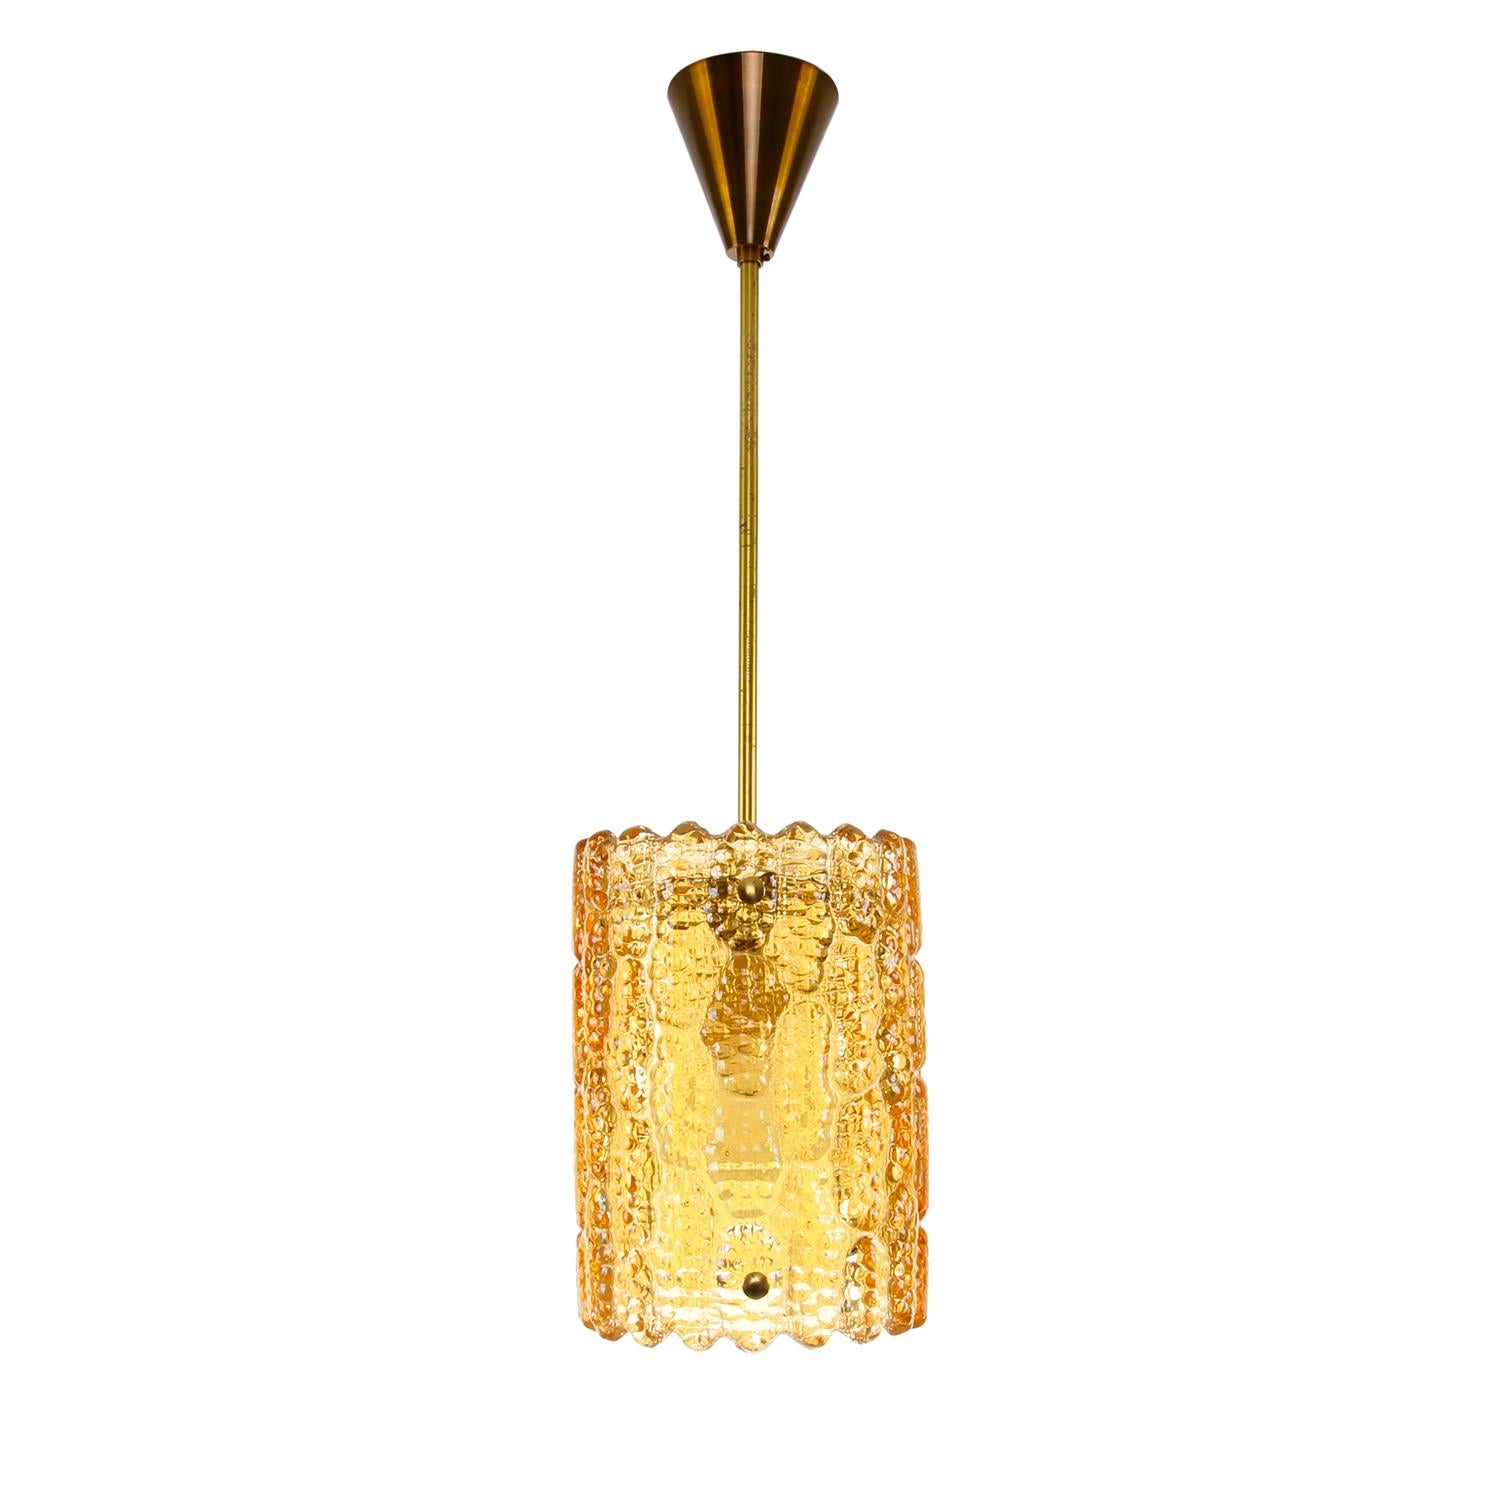 Orrefors Gefion Amber Crystal & Brass Pendant by Fagerlund, Lyfa/Orrefors, 1960s For Sale